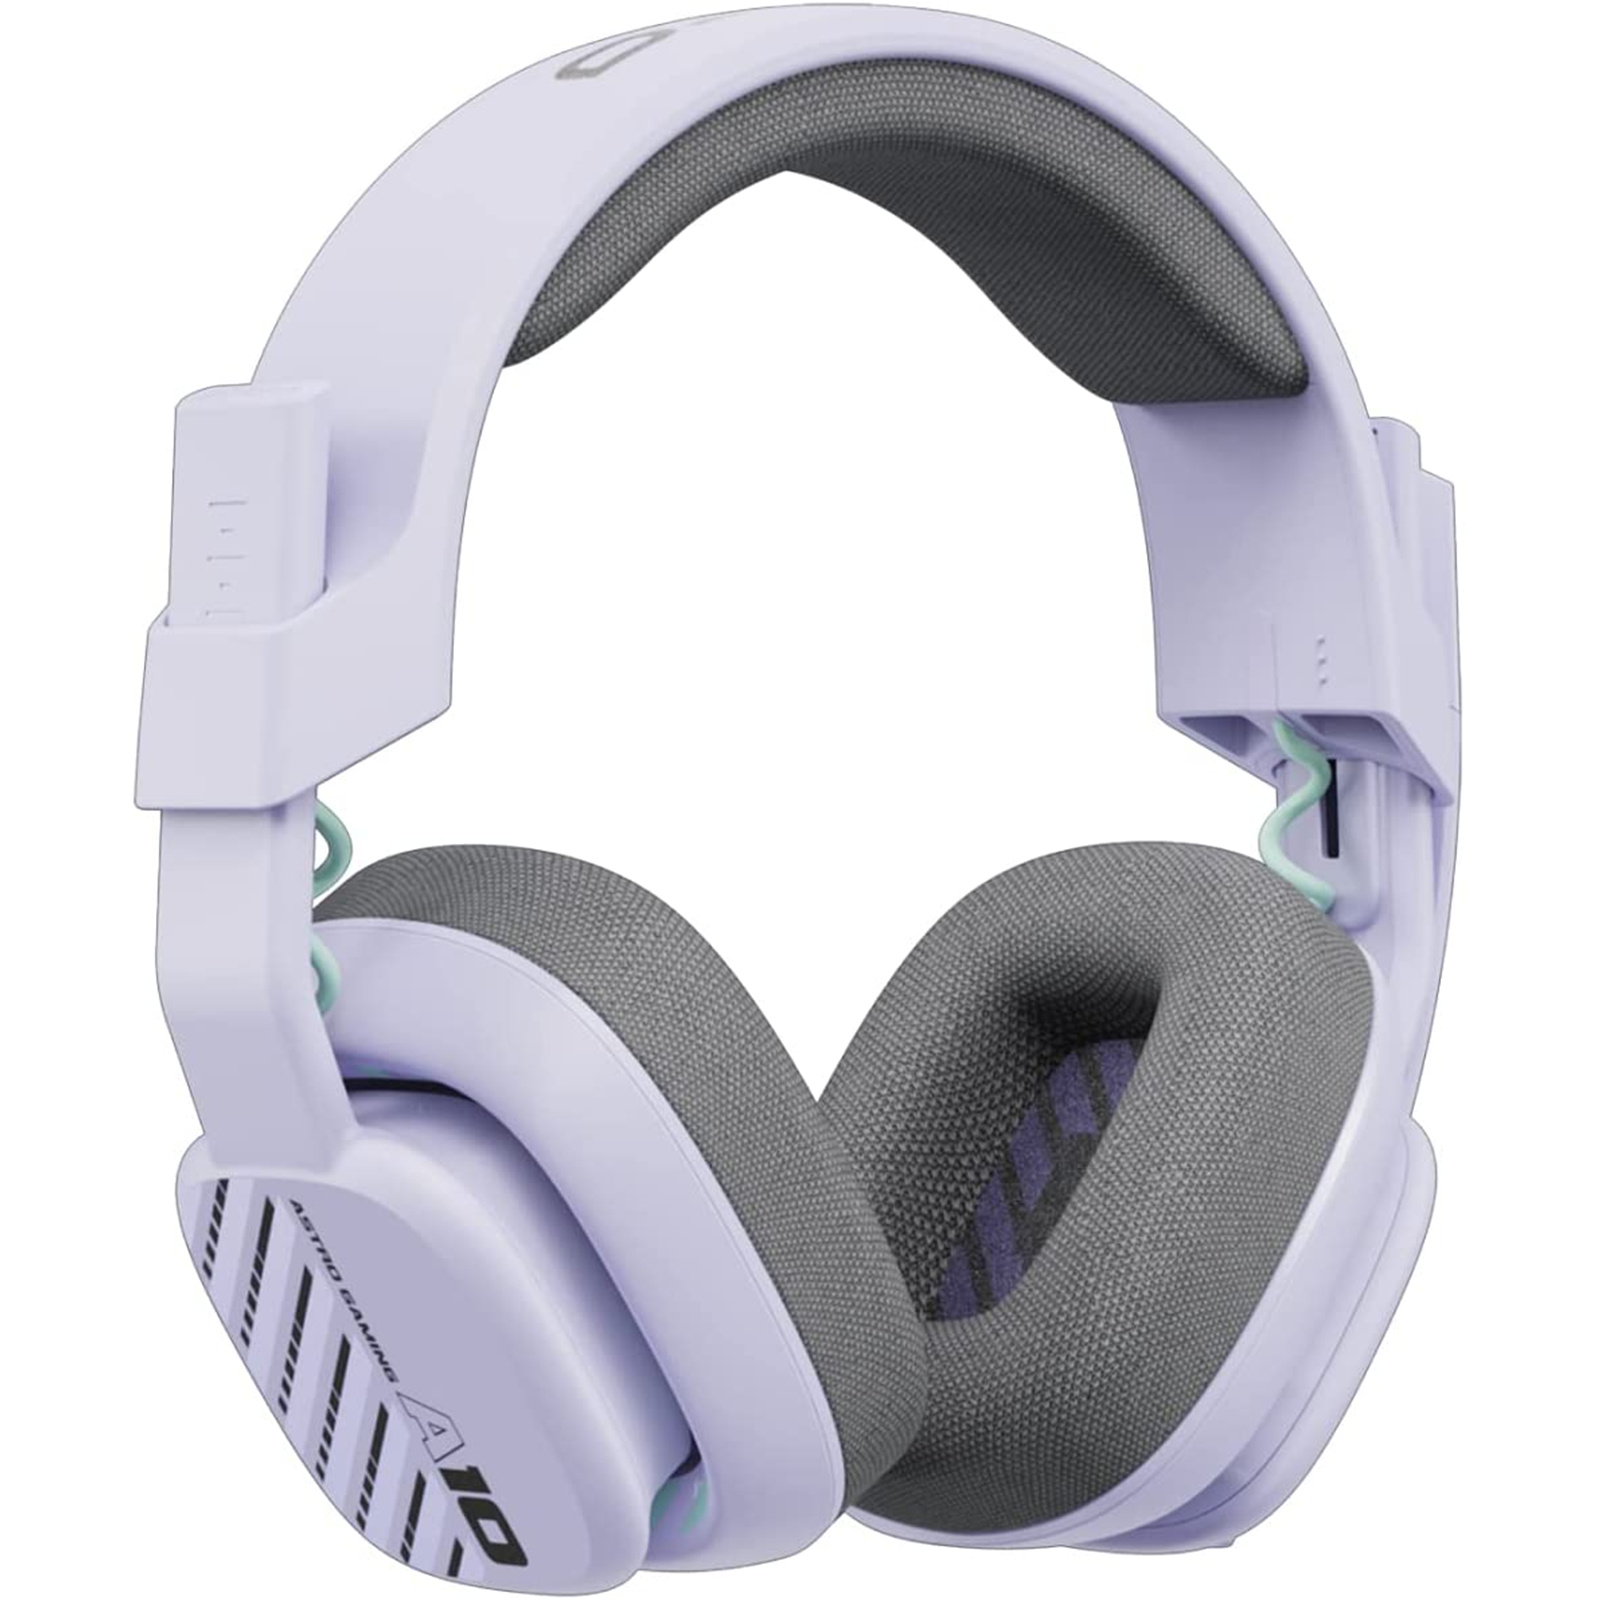 Buy the Astro A10 Gen.2 Gaming Headset For PC - Lilac ( 939-002079 ) online  - PBTech.com/pacific